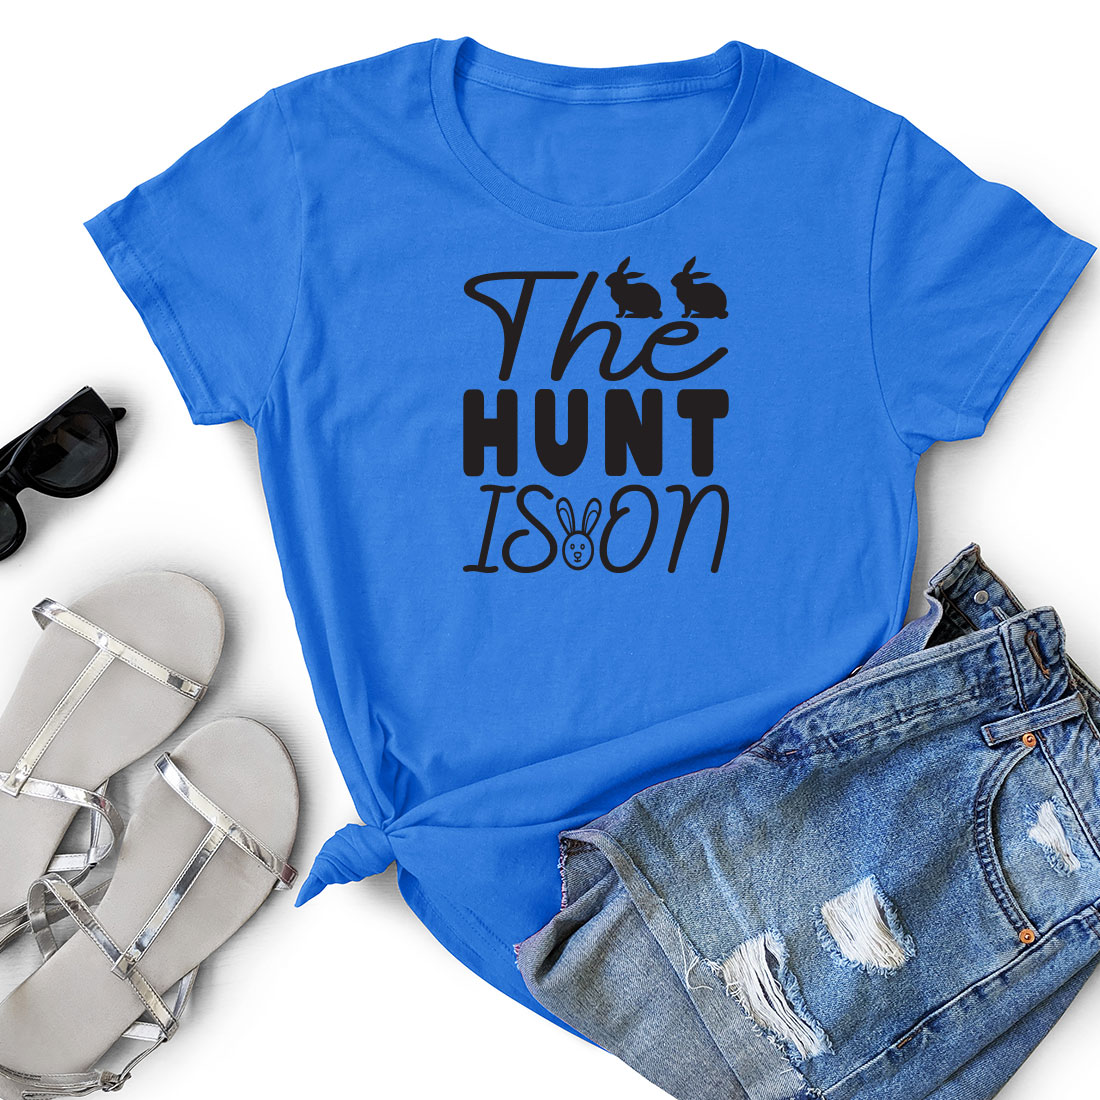 T - shirt that says the hunt is on next to a pair of shorts.